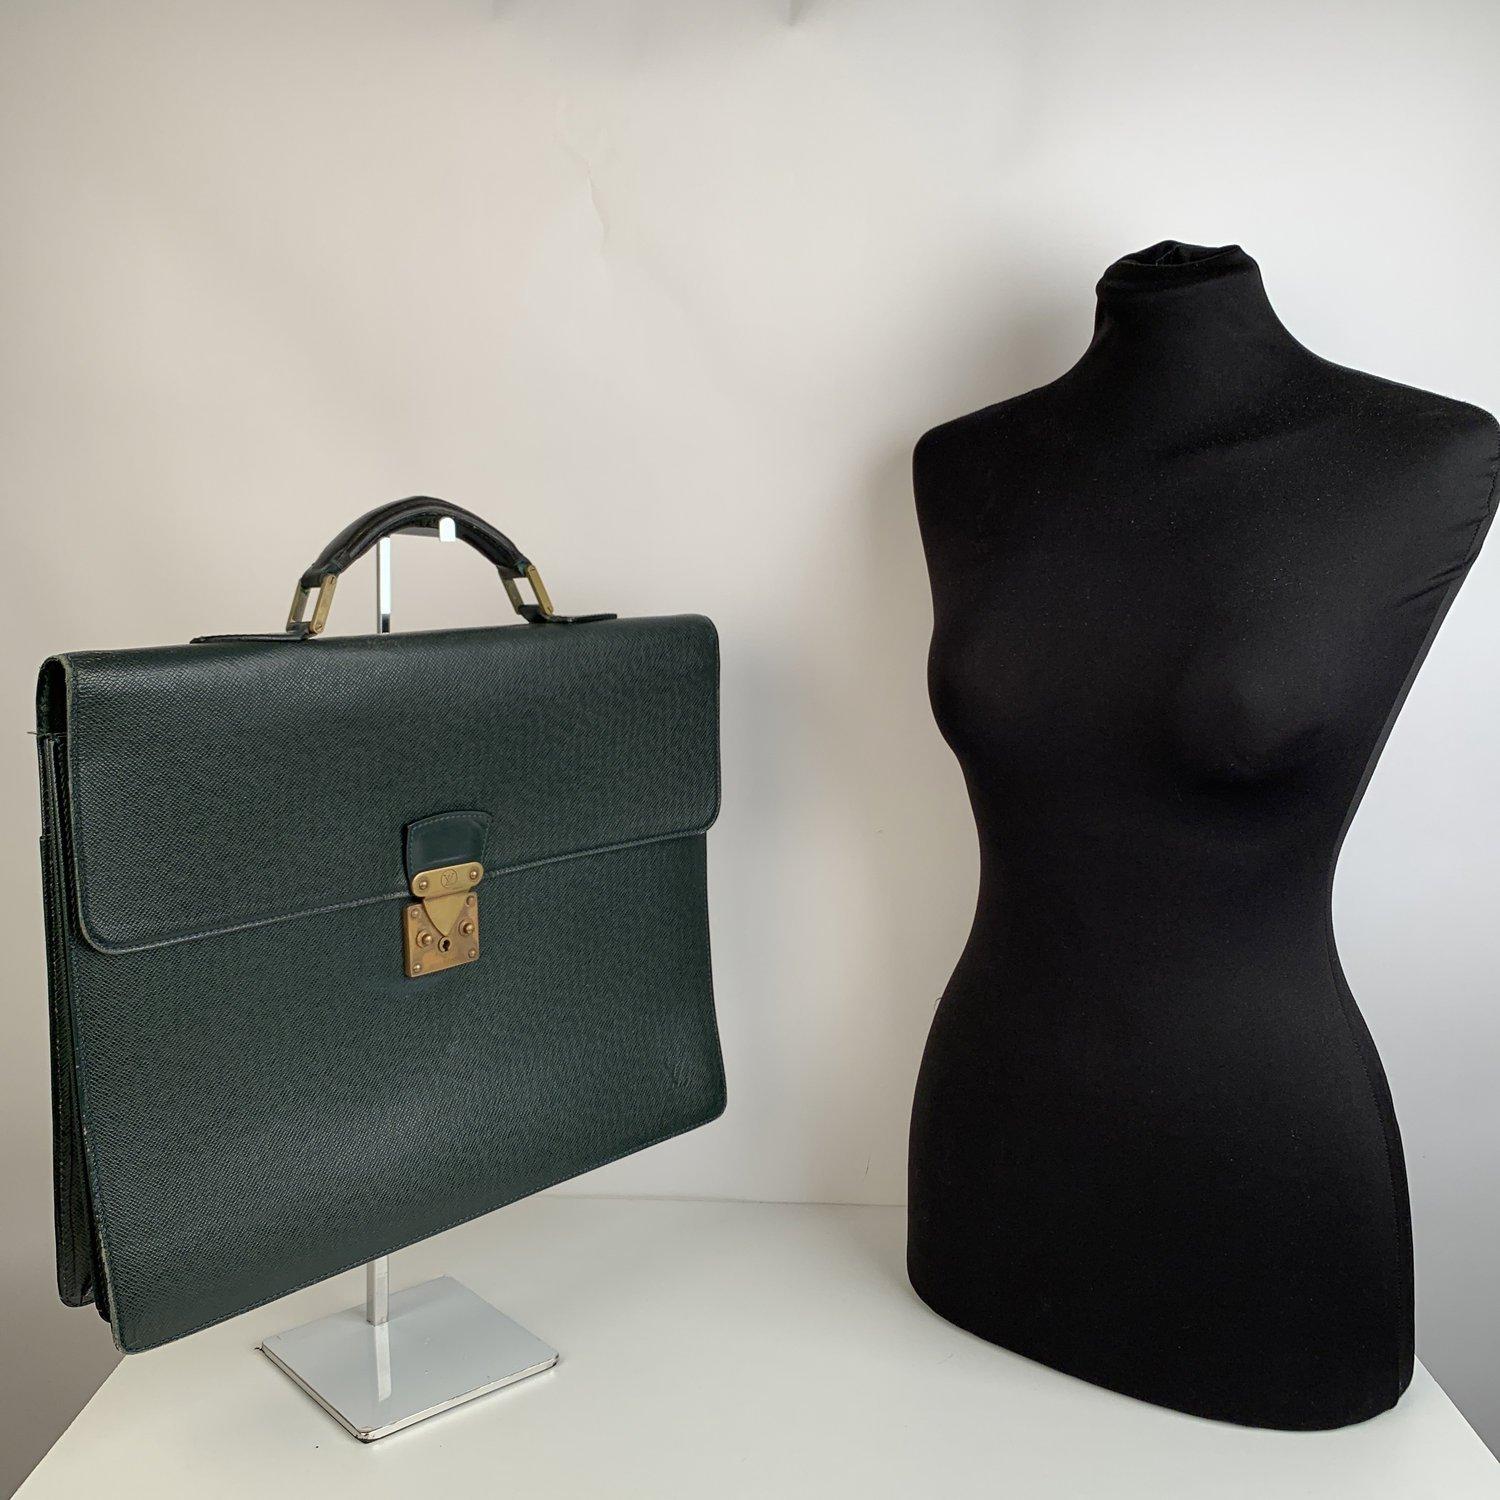 MATERIAL: Leather COLOR: Green MODEL: Briefcase GENDER: Women, Men SIZE: Large Condition B - VERY GOOD Gently used. Some normal wear of use on the hardware. Some wear of use on leather handle. Some wear of use on bottom corners, Some scratches on